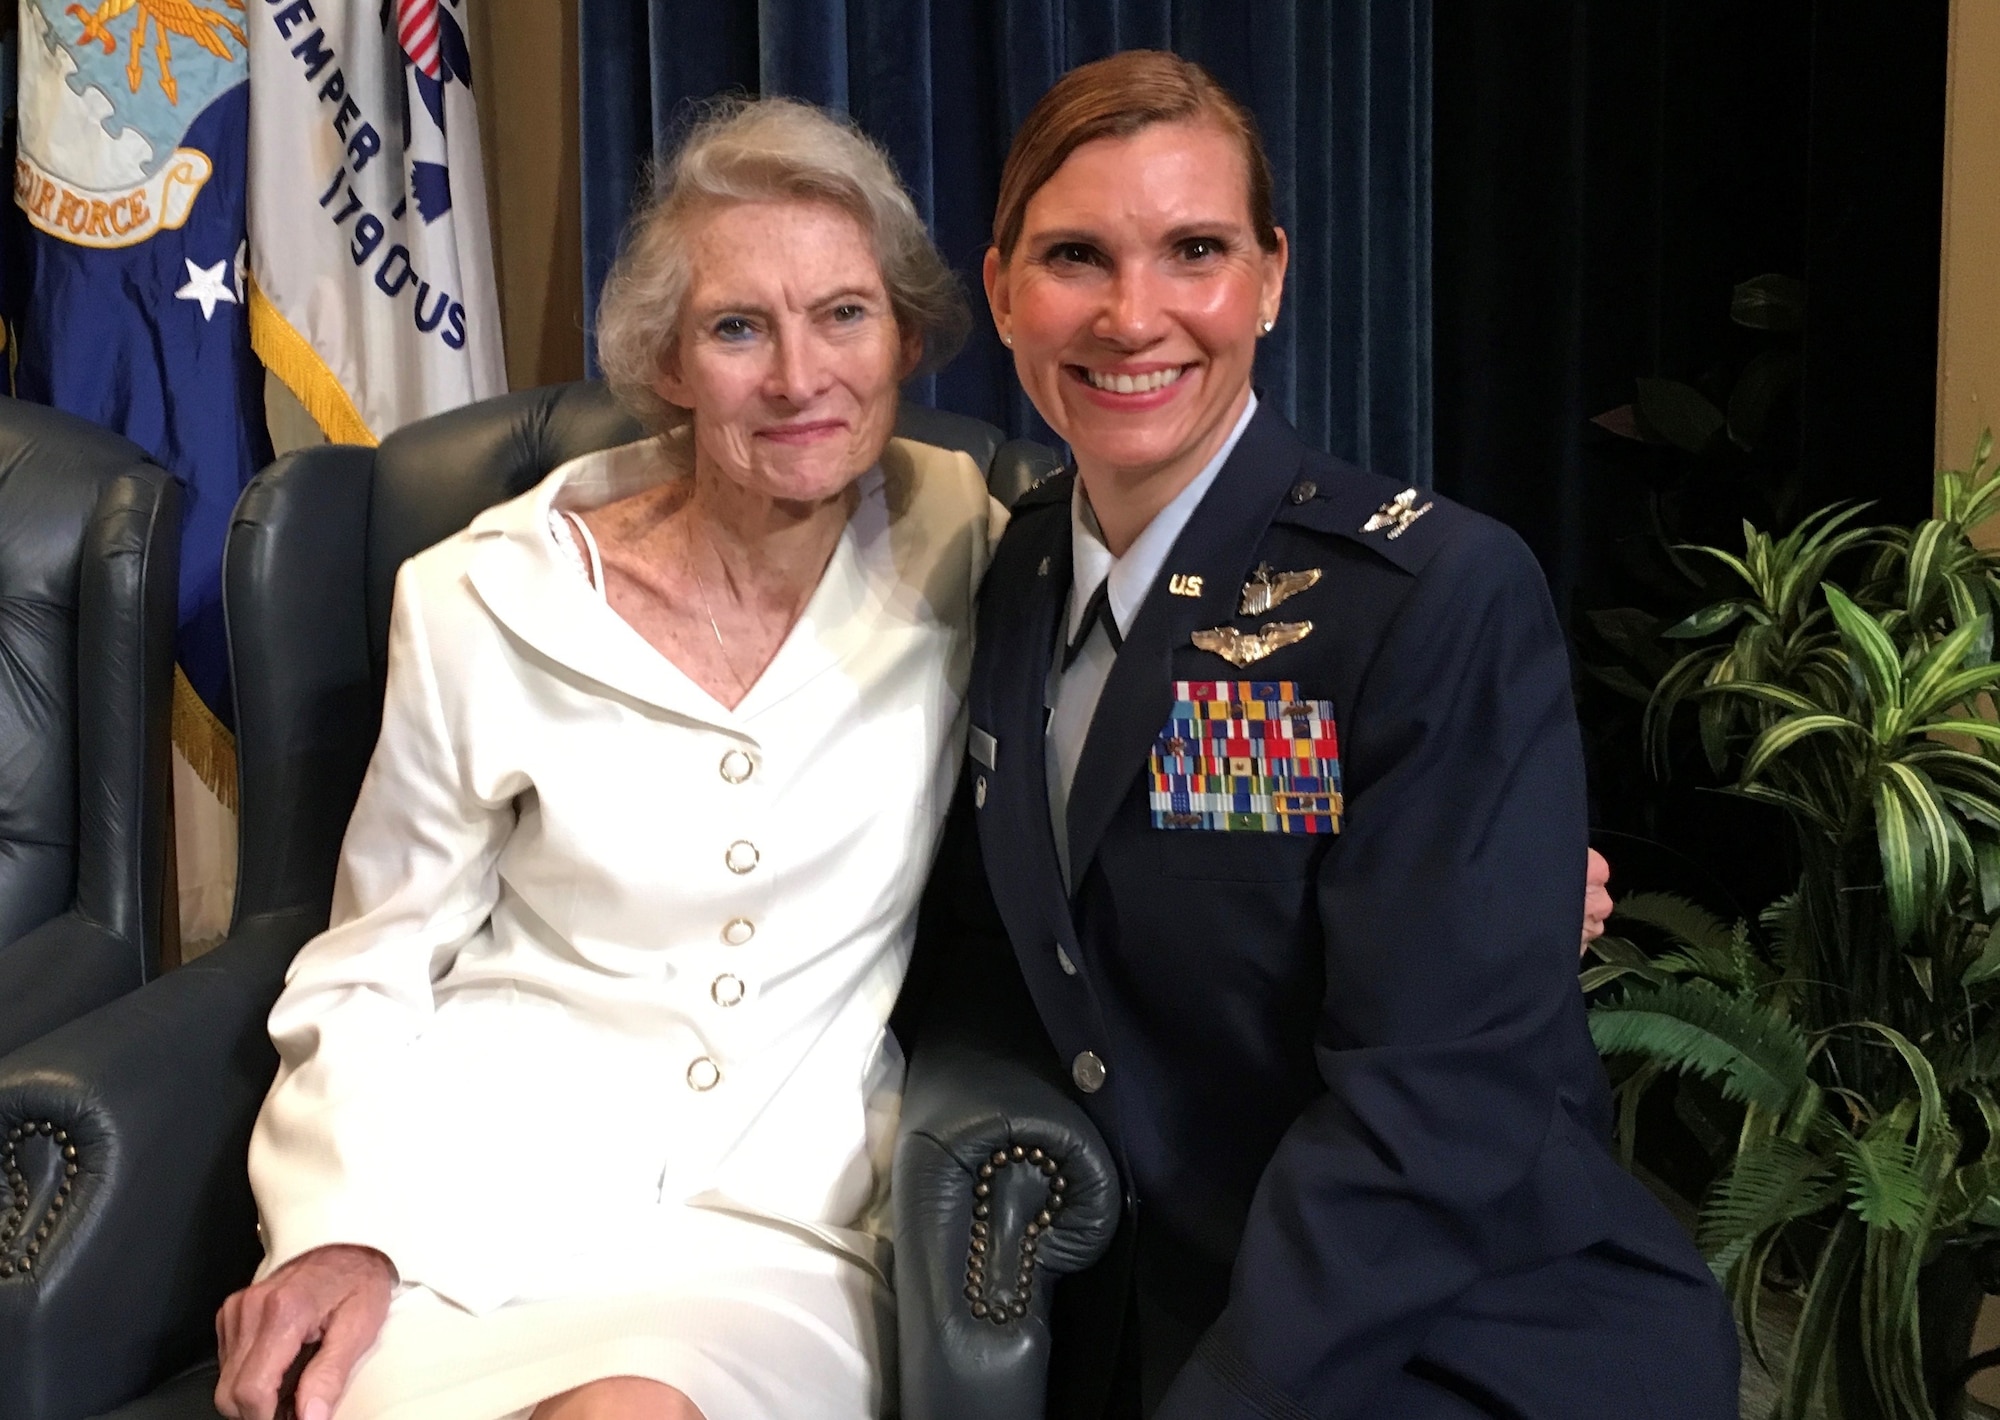 Col. Willis poses for a photo with her mother